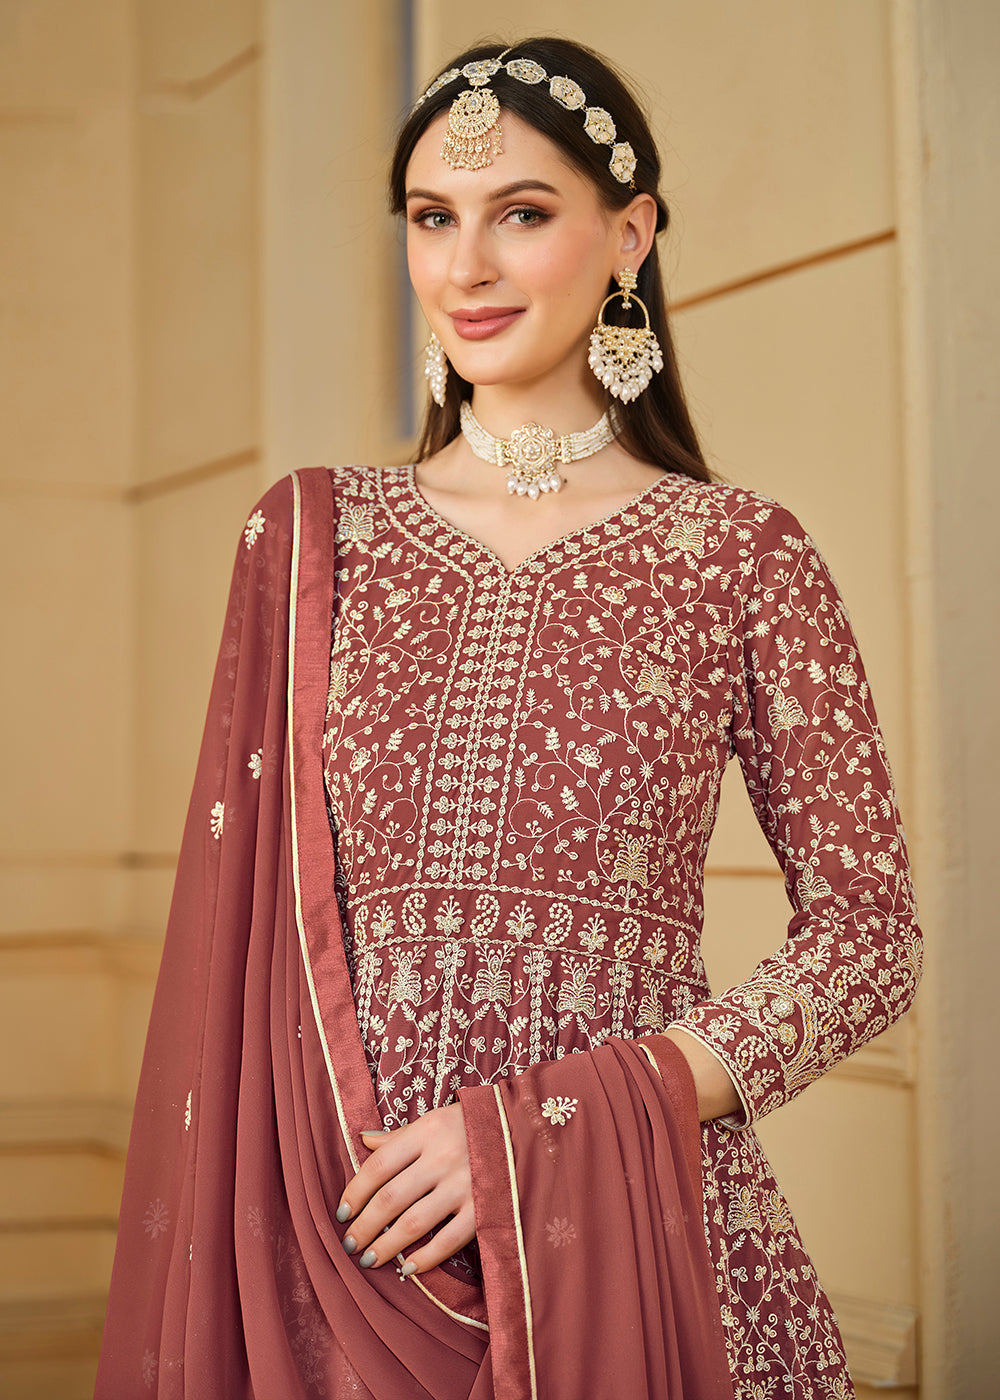 Buy Now Tangy Brown Thread & Sequins Georgette Anarkali Suit Online in USA, UK, Australia, New Zealand, Canada & Worldwide at Empress Clothing.